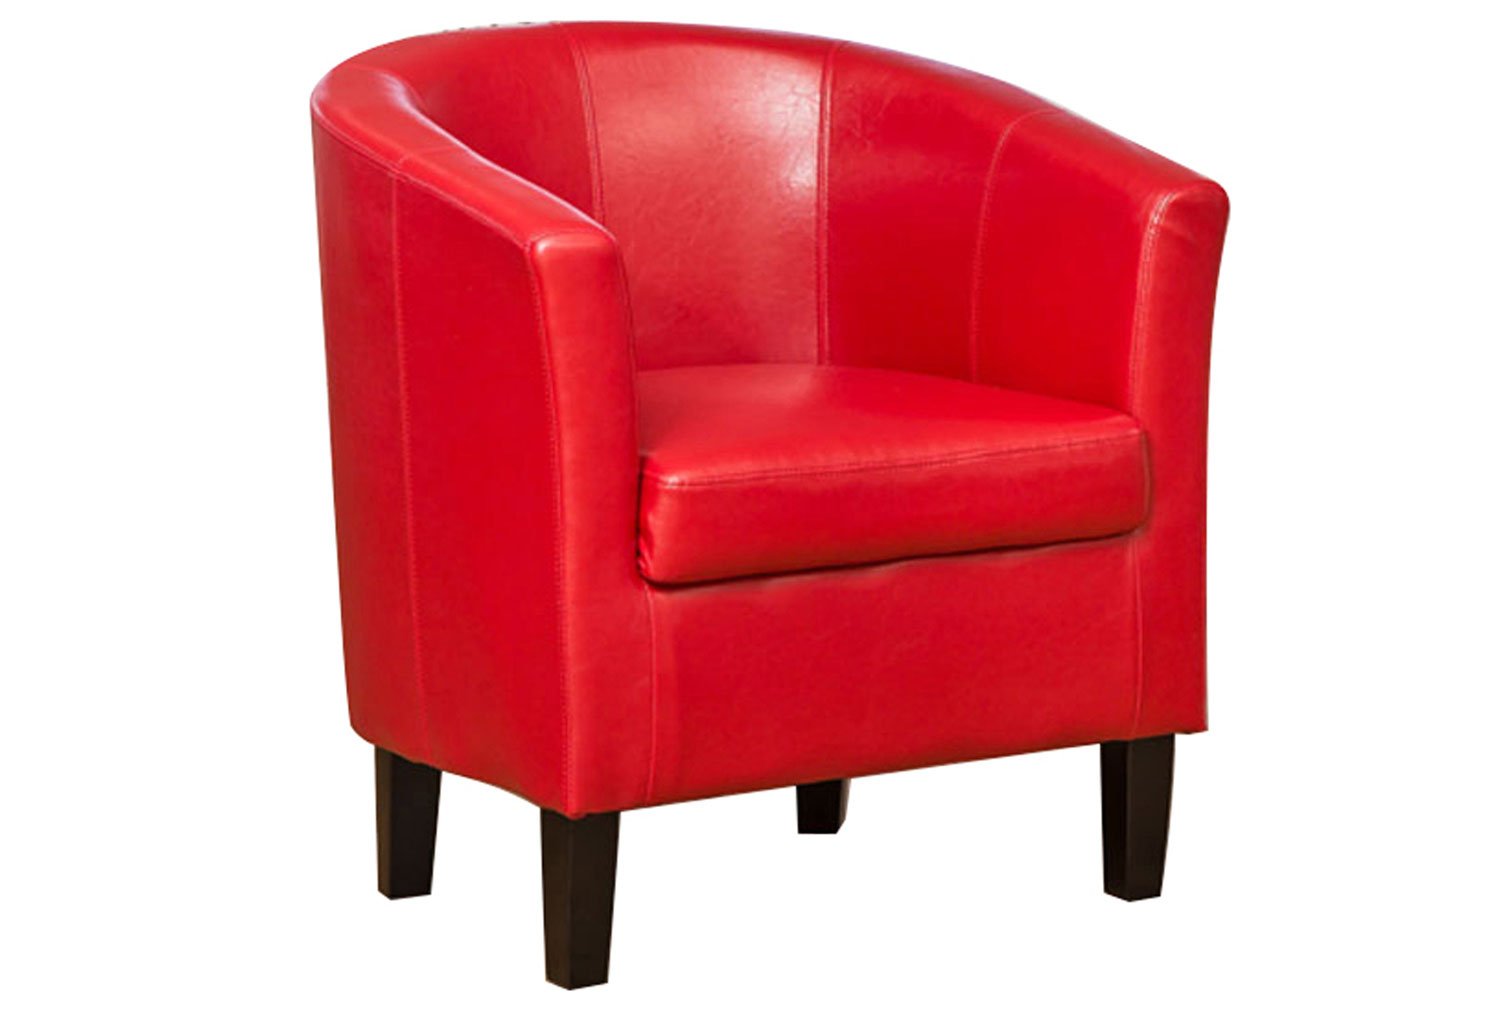 Peres Tub Chair, Red